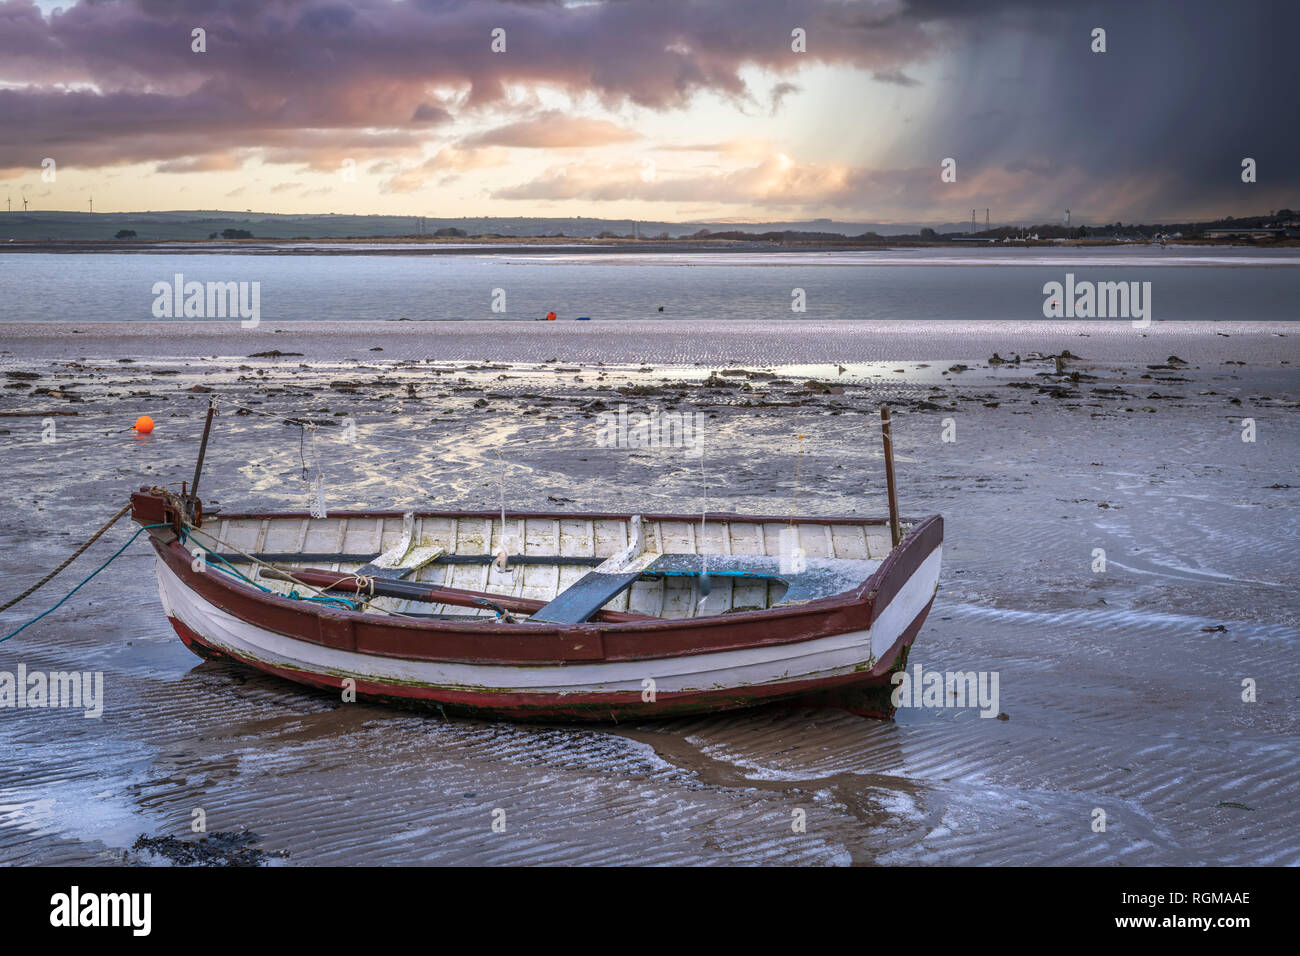 Appledore, Devon, UK. 30th January, 2019. UK Weather - Wednesday 30th January. After a cold and windswept night, the small North Devon coastal village of Appledore is hit by sweeping storm clouds, depositing a layer of sleet over the River Torridge estuary. Credit: Terry Mathews/Alamy Live News Stock Photo